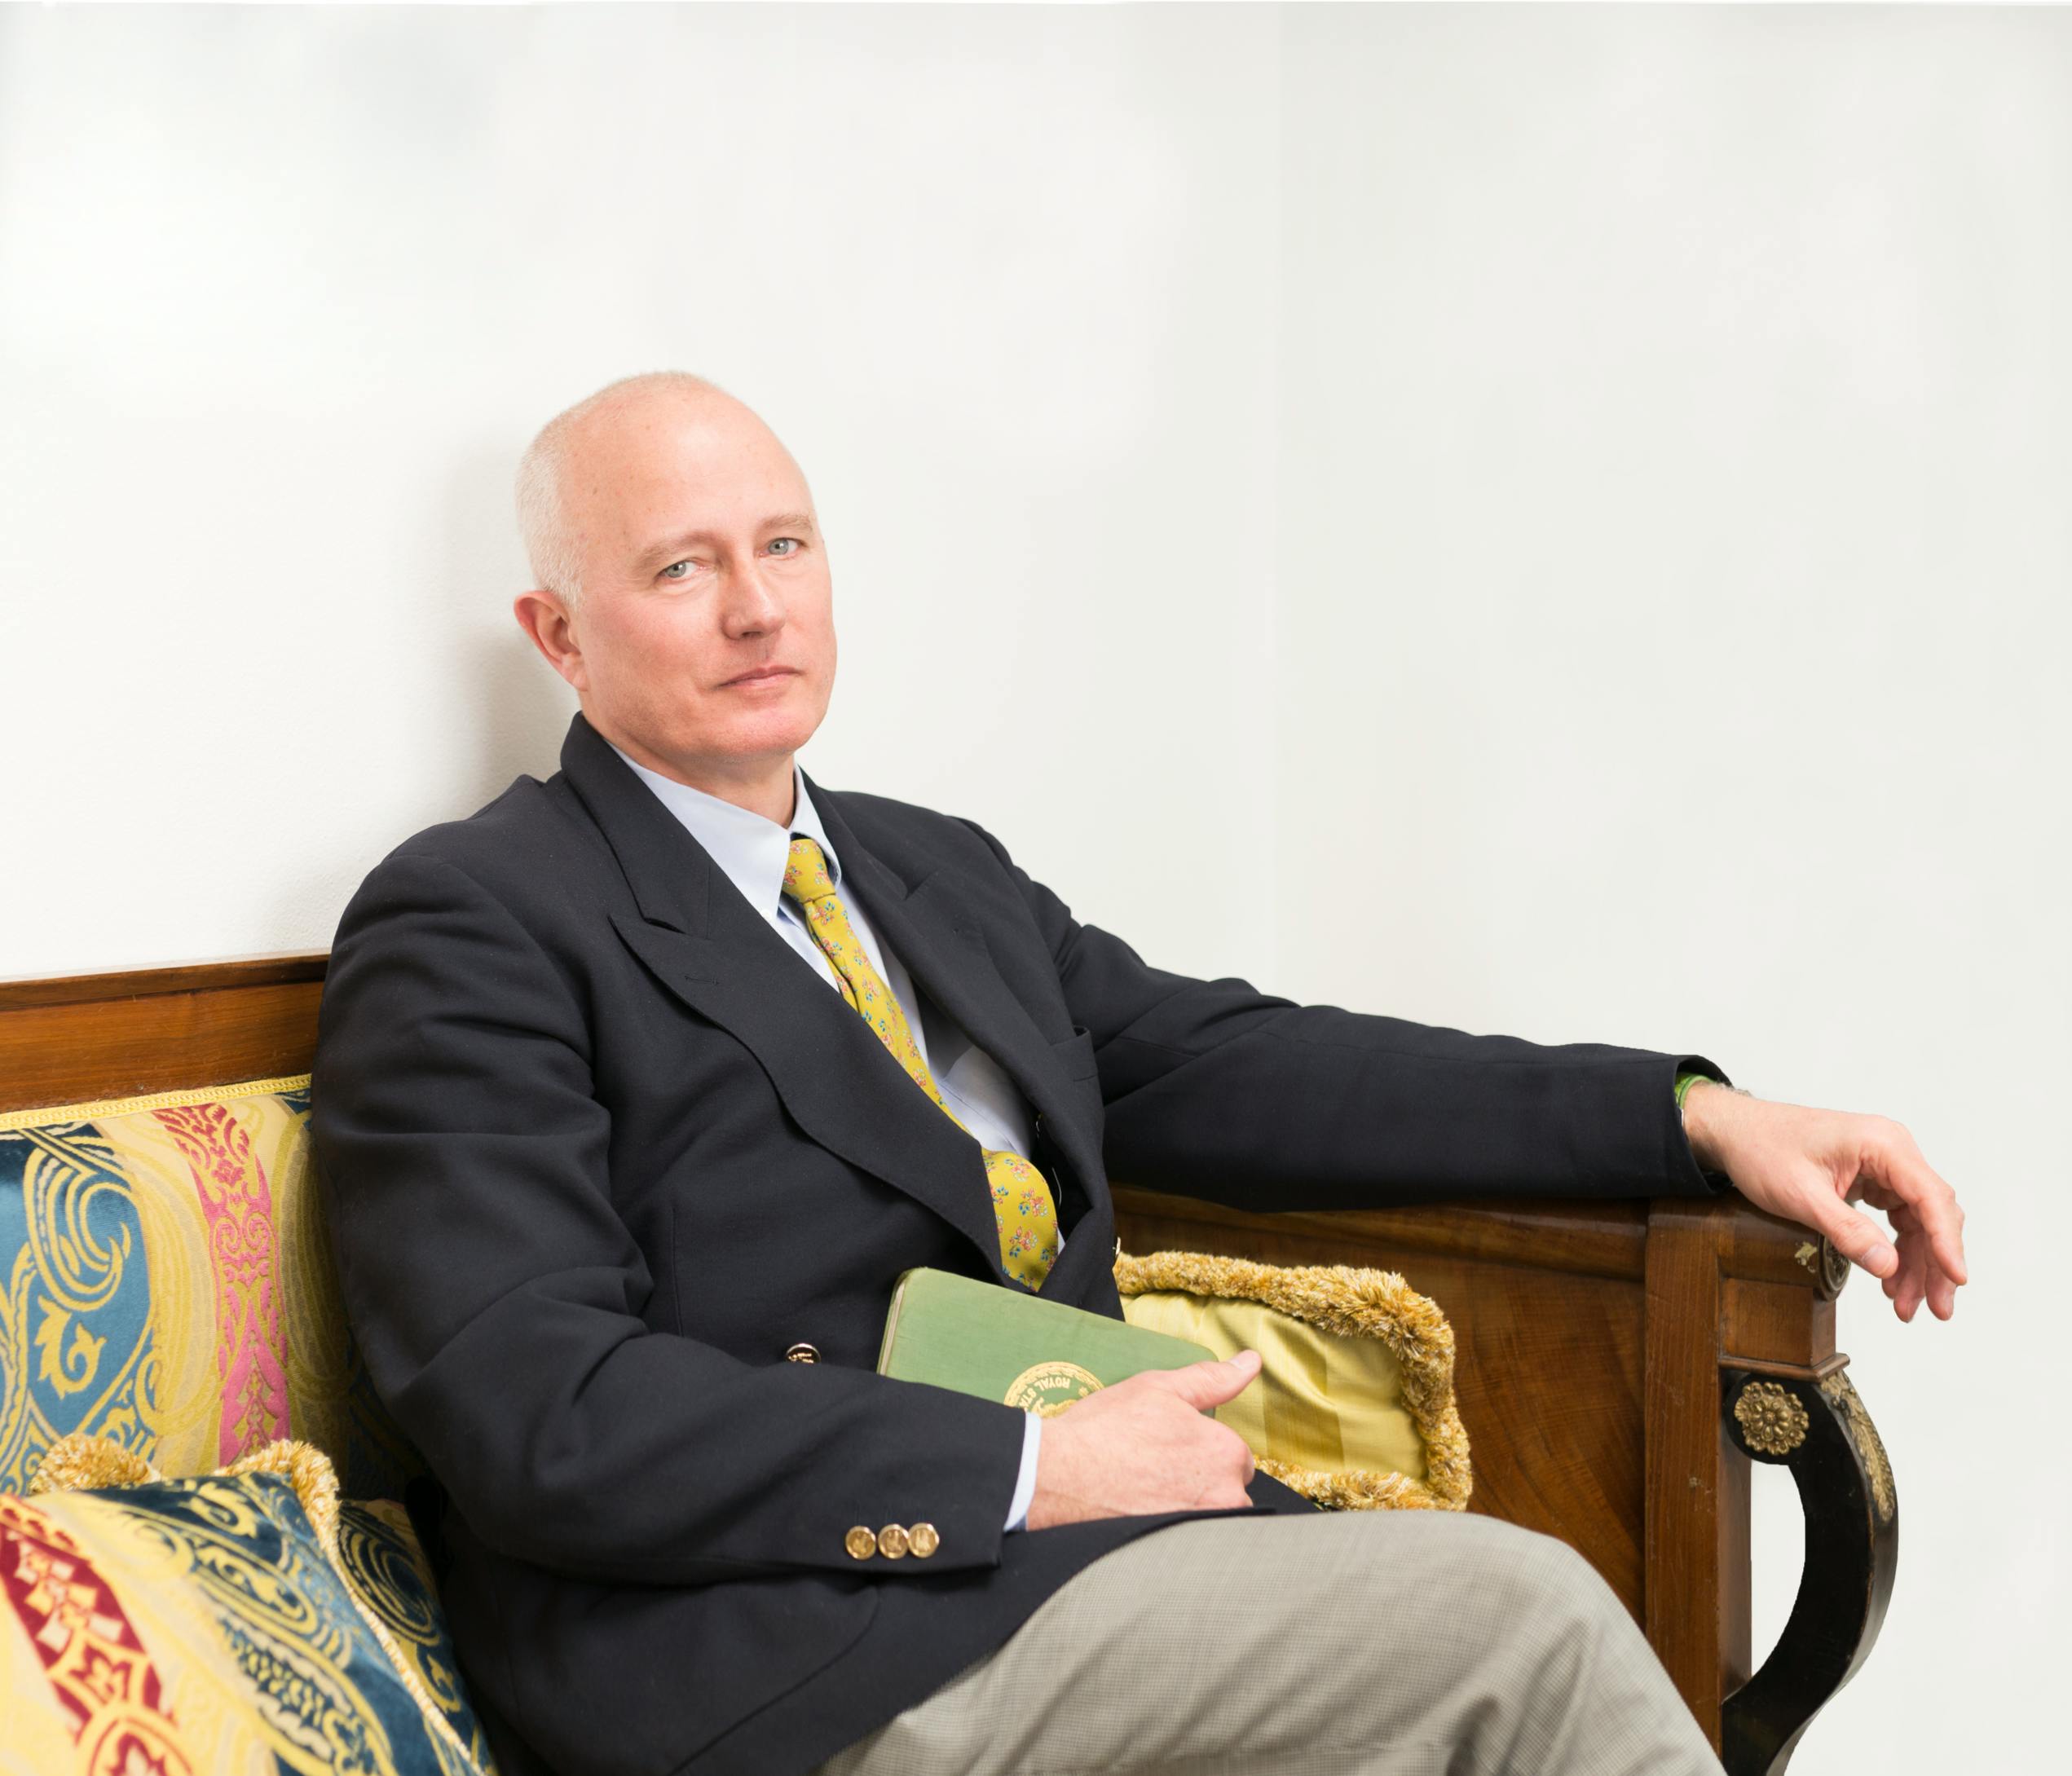 Dr. Stefano Pallanti sitting on an antique sofa with his left arm resting on an armrest and in his right hand a green notebook.